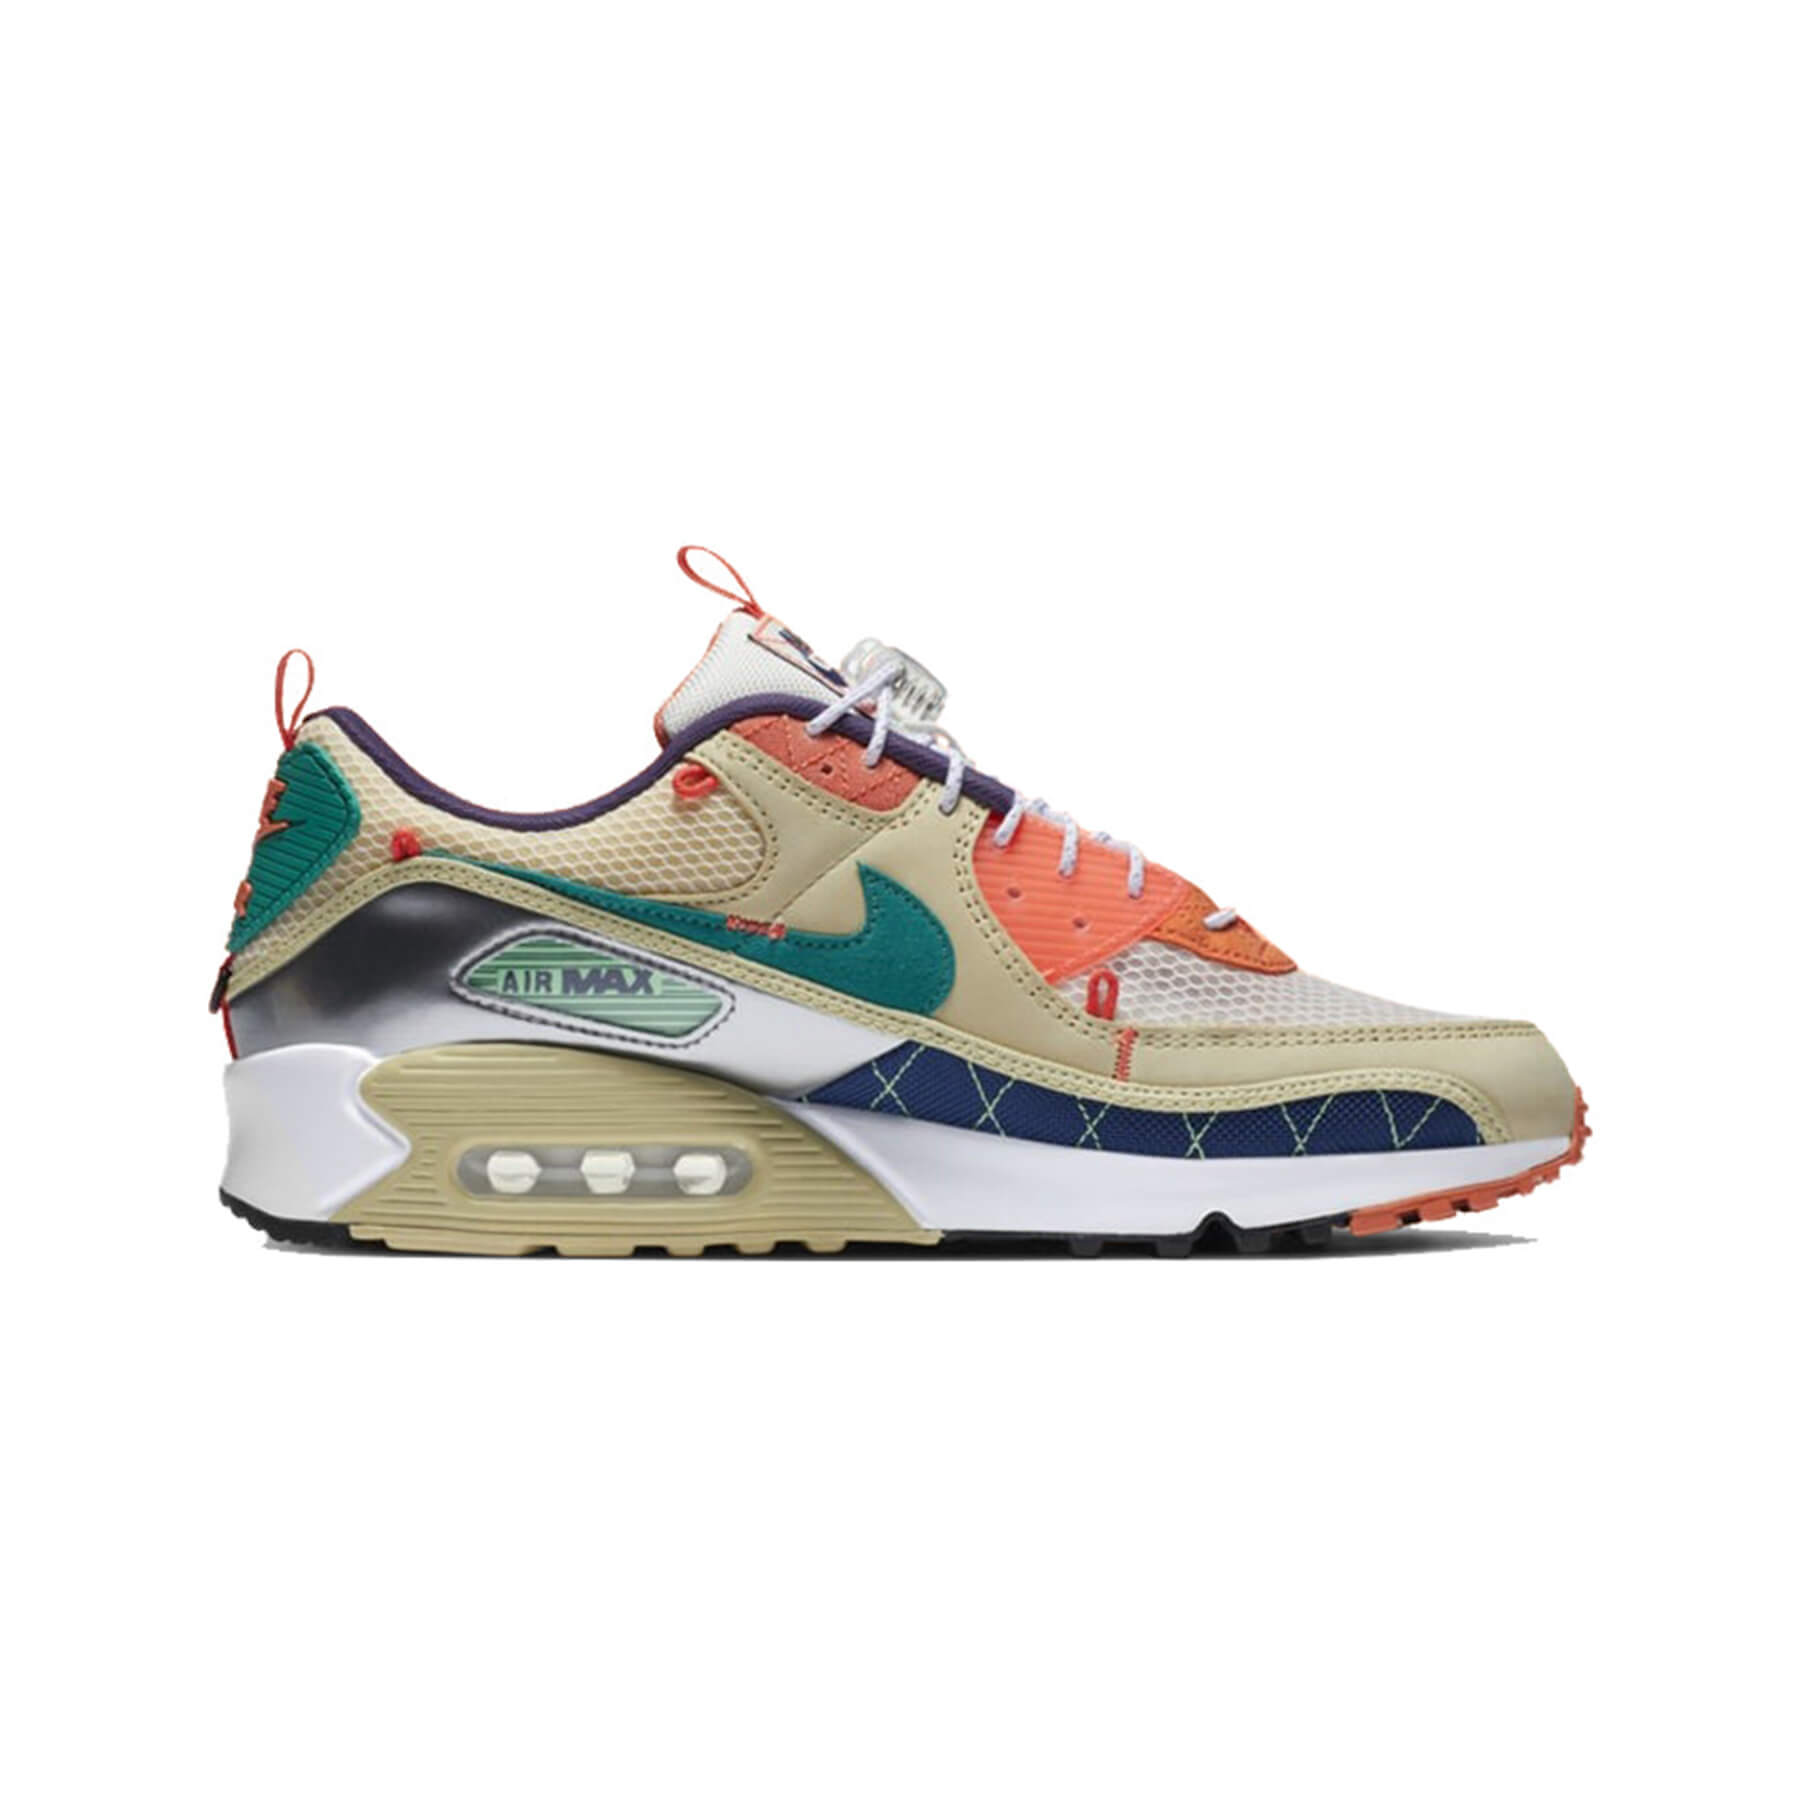 Nike Air Max 90 Trail Team Gold - Fast Delivery